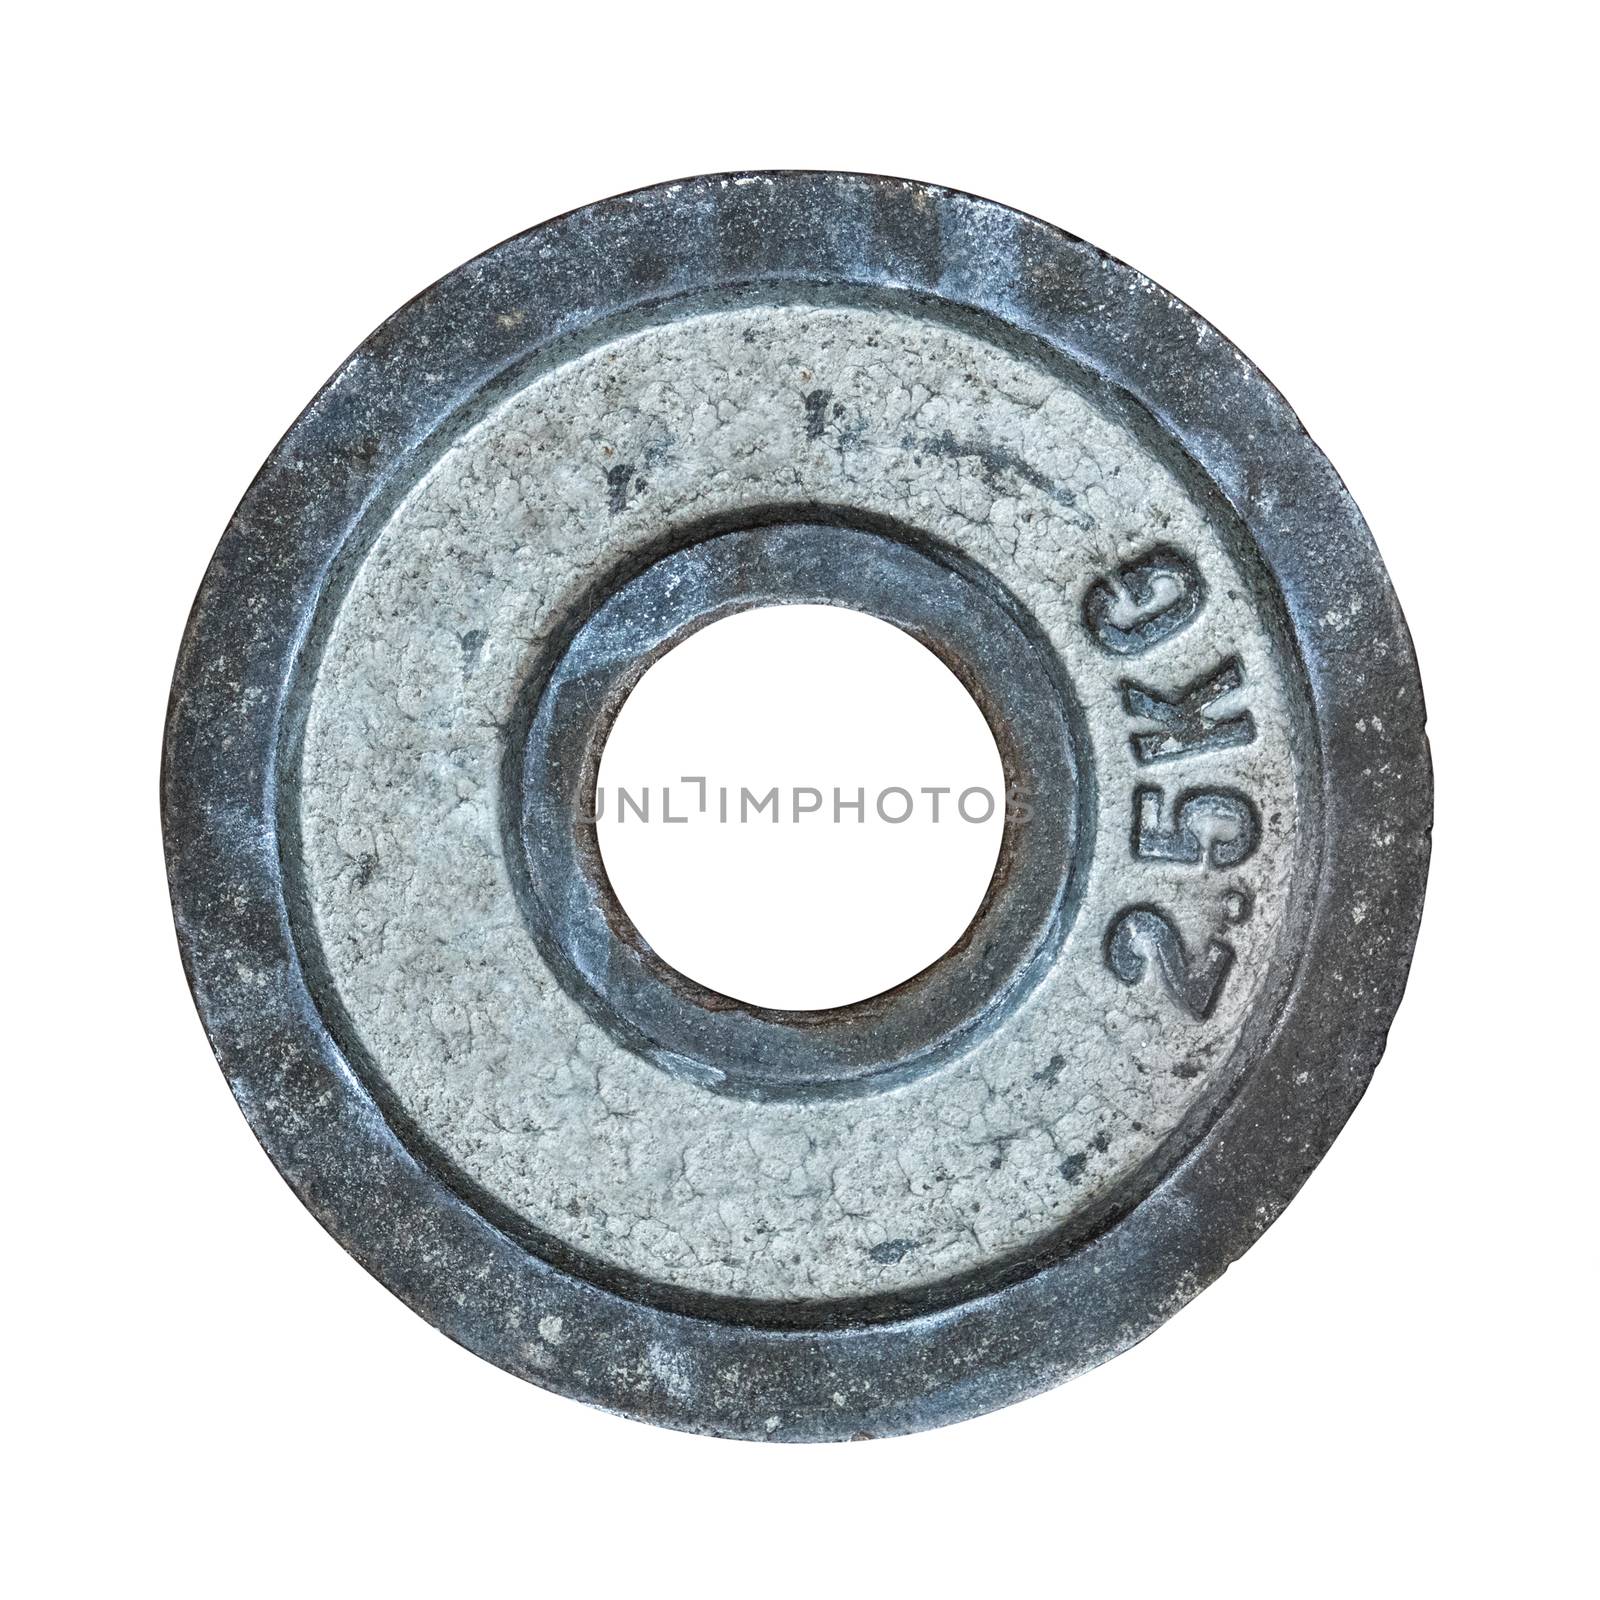 Grungy Isolated Gym Barbell Plate On A White Background